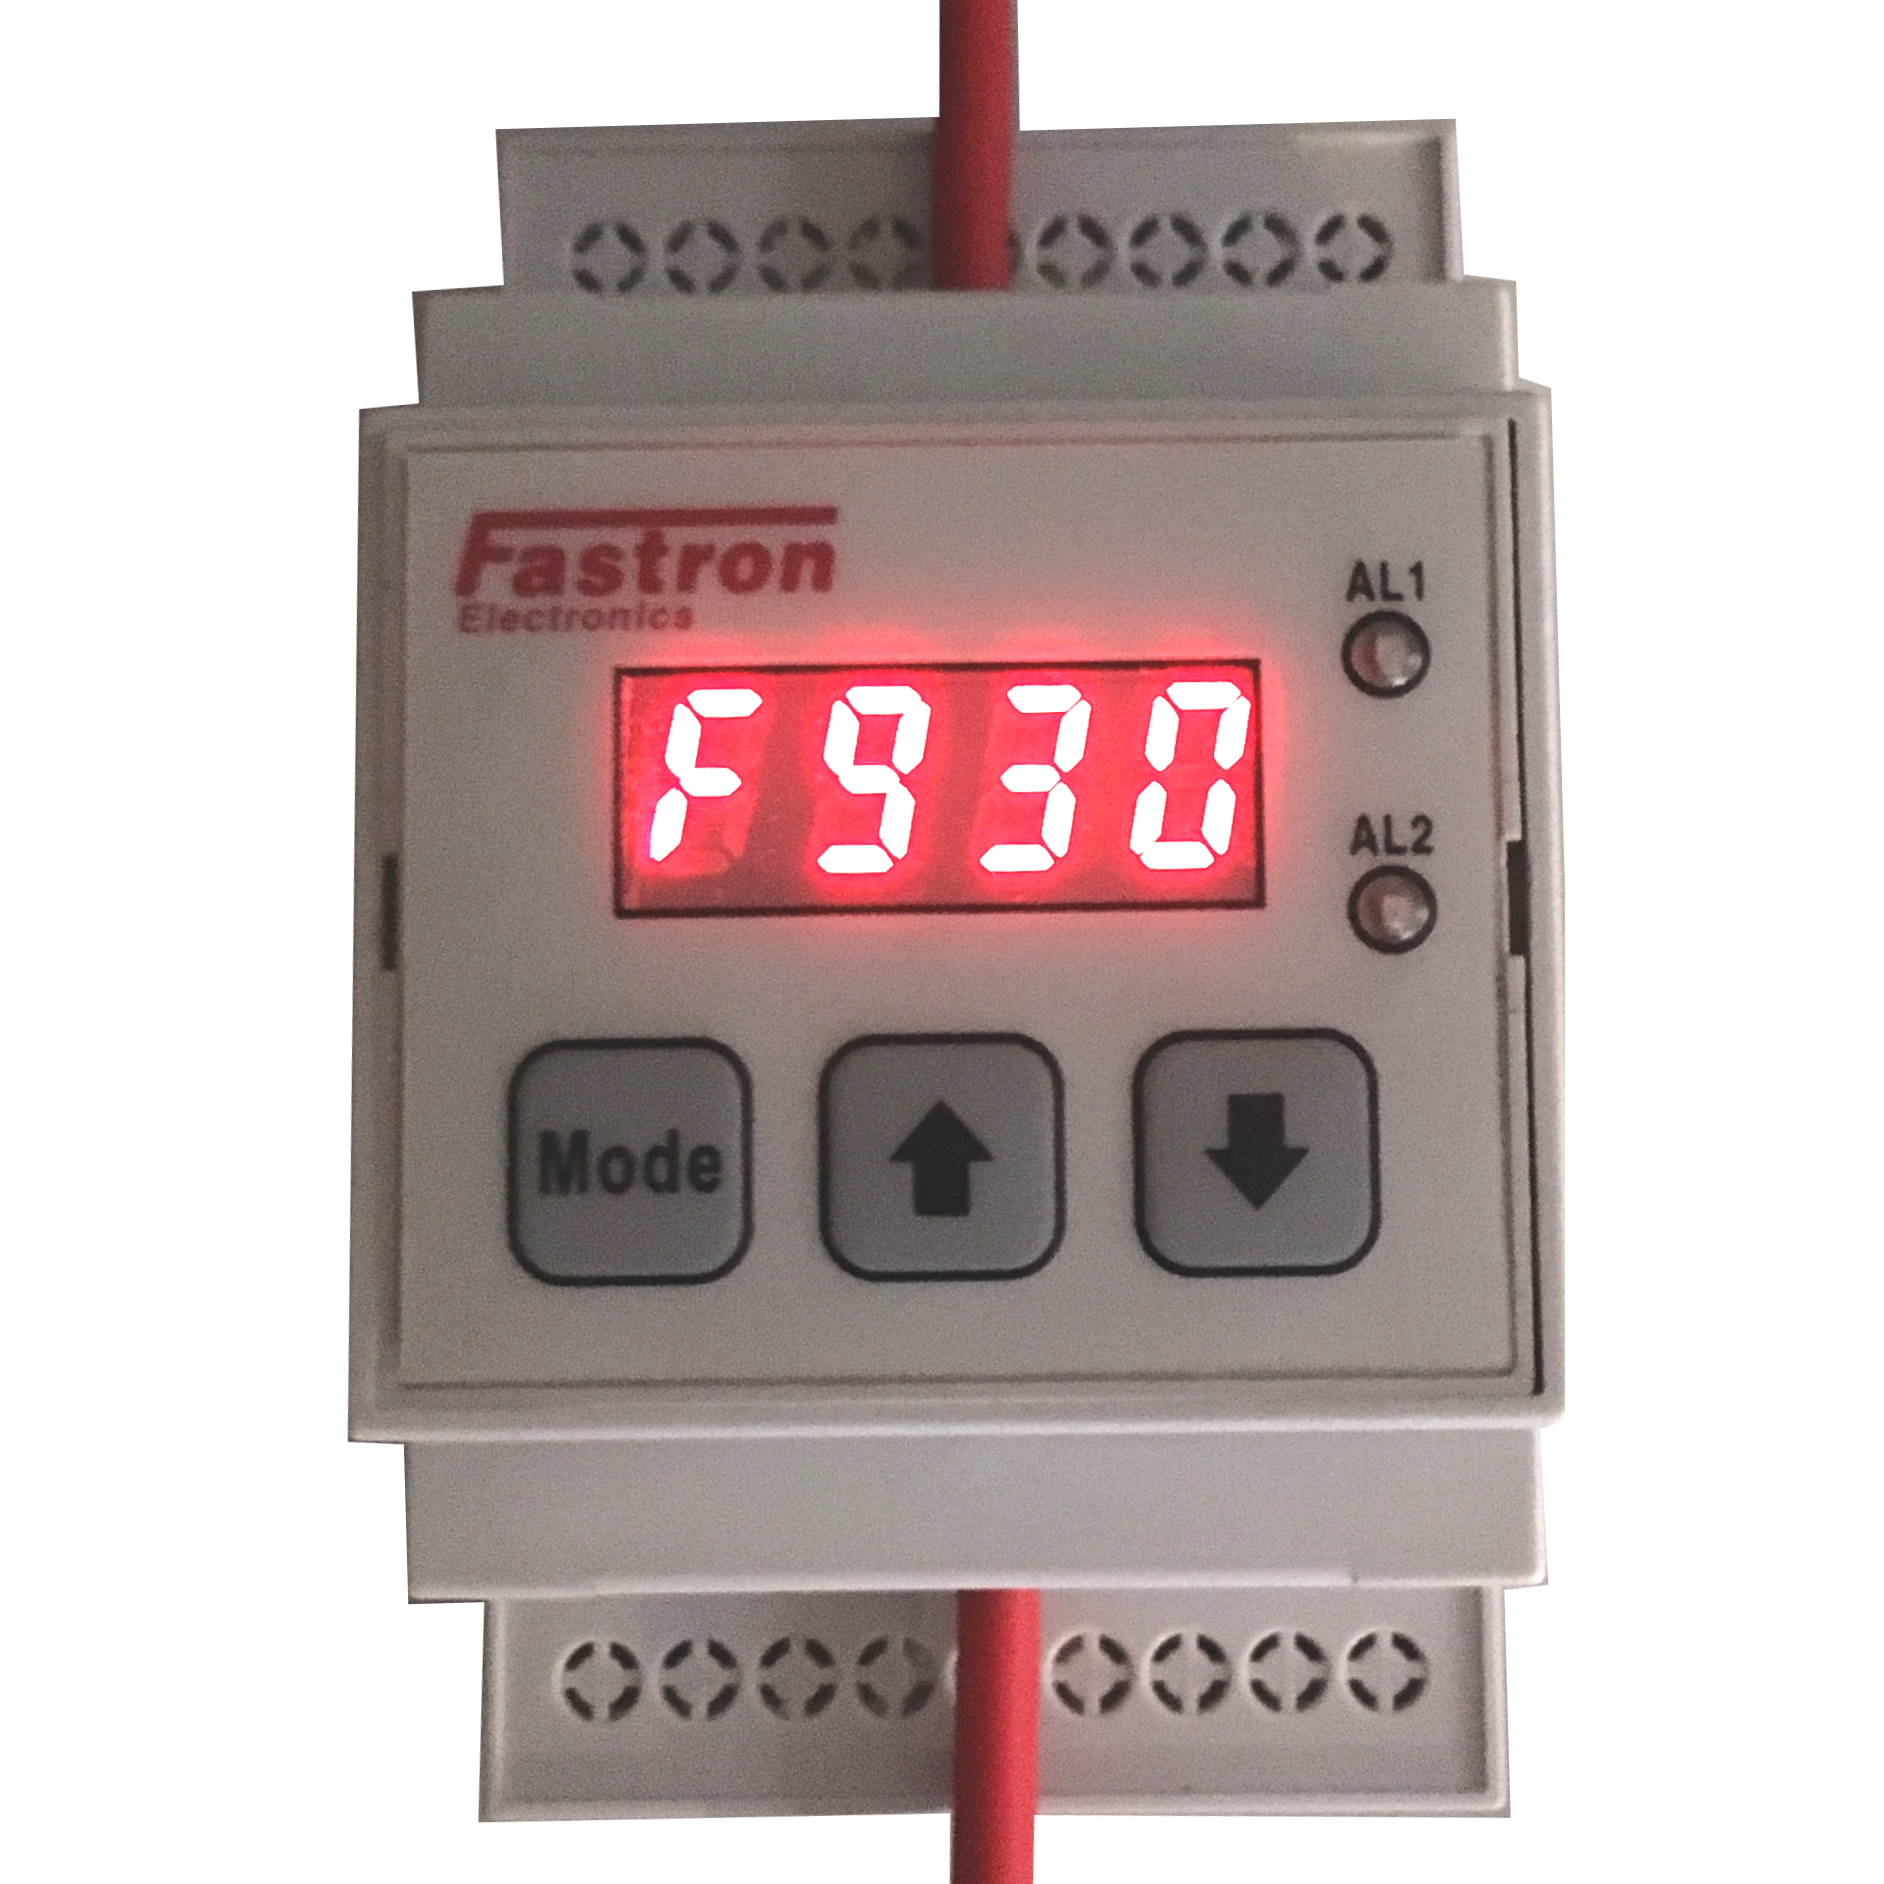 F930 Series Programmable True RMS Various Ranges 10mA - 250 Amp AC/DC Current Transducer with 4 Digit LED Display, Selectable Process Level Outputs, Optional RS485 and/or 2 x Relay Outputs